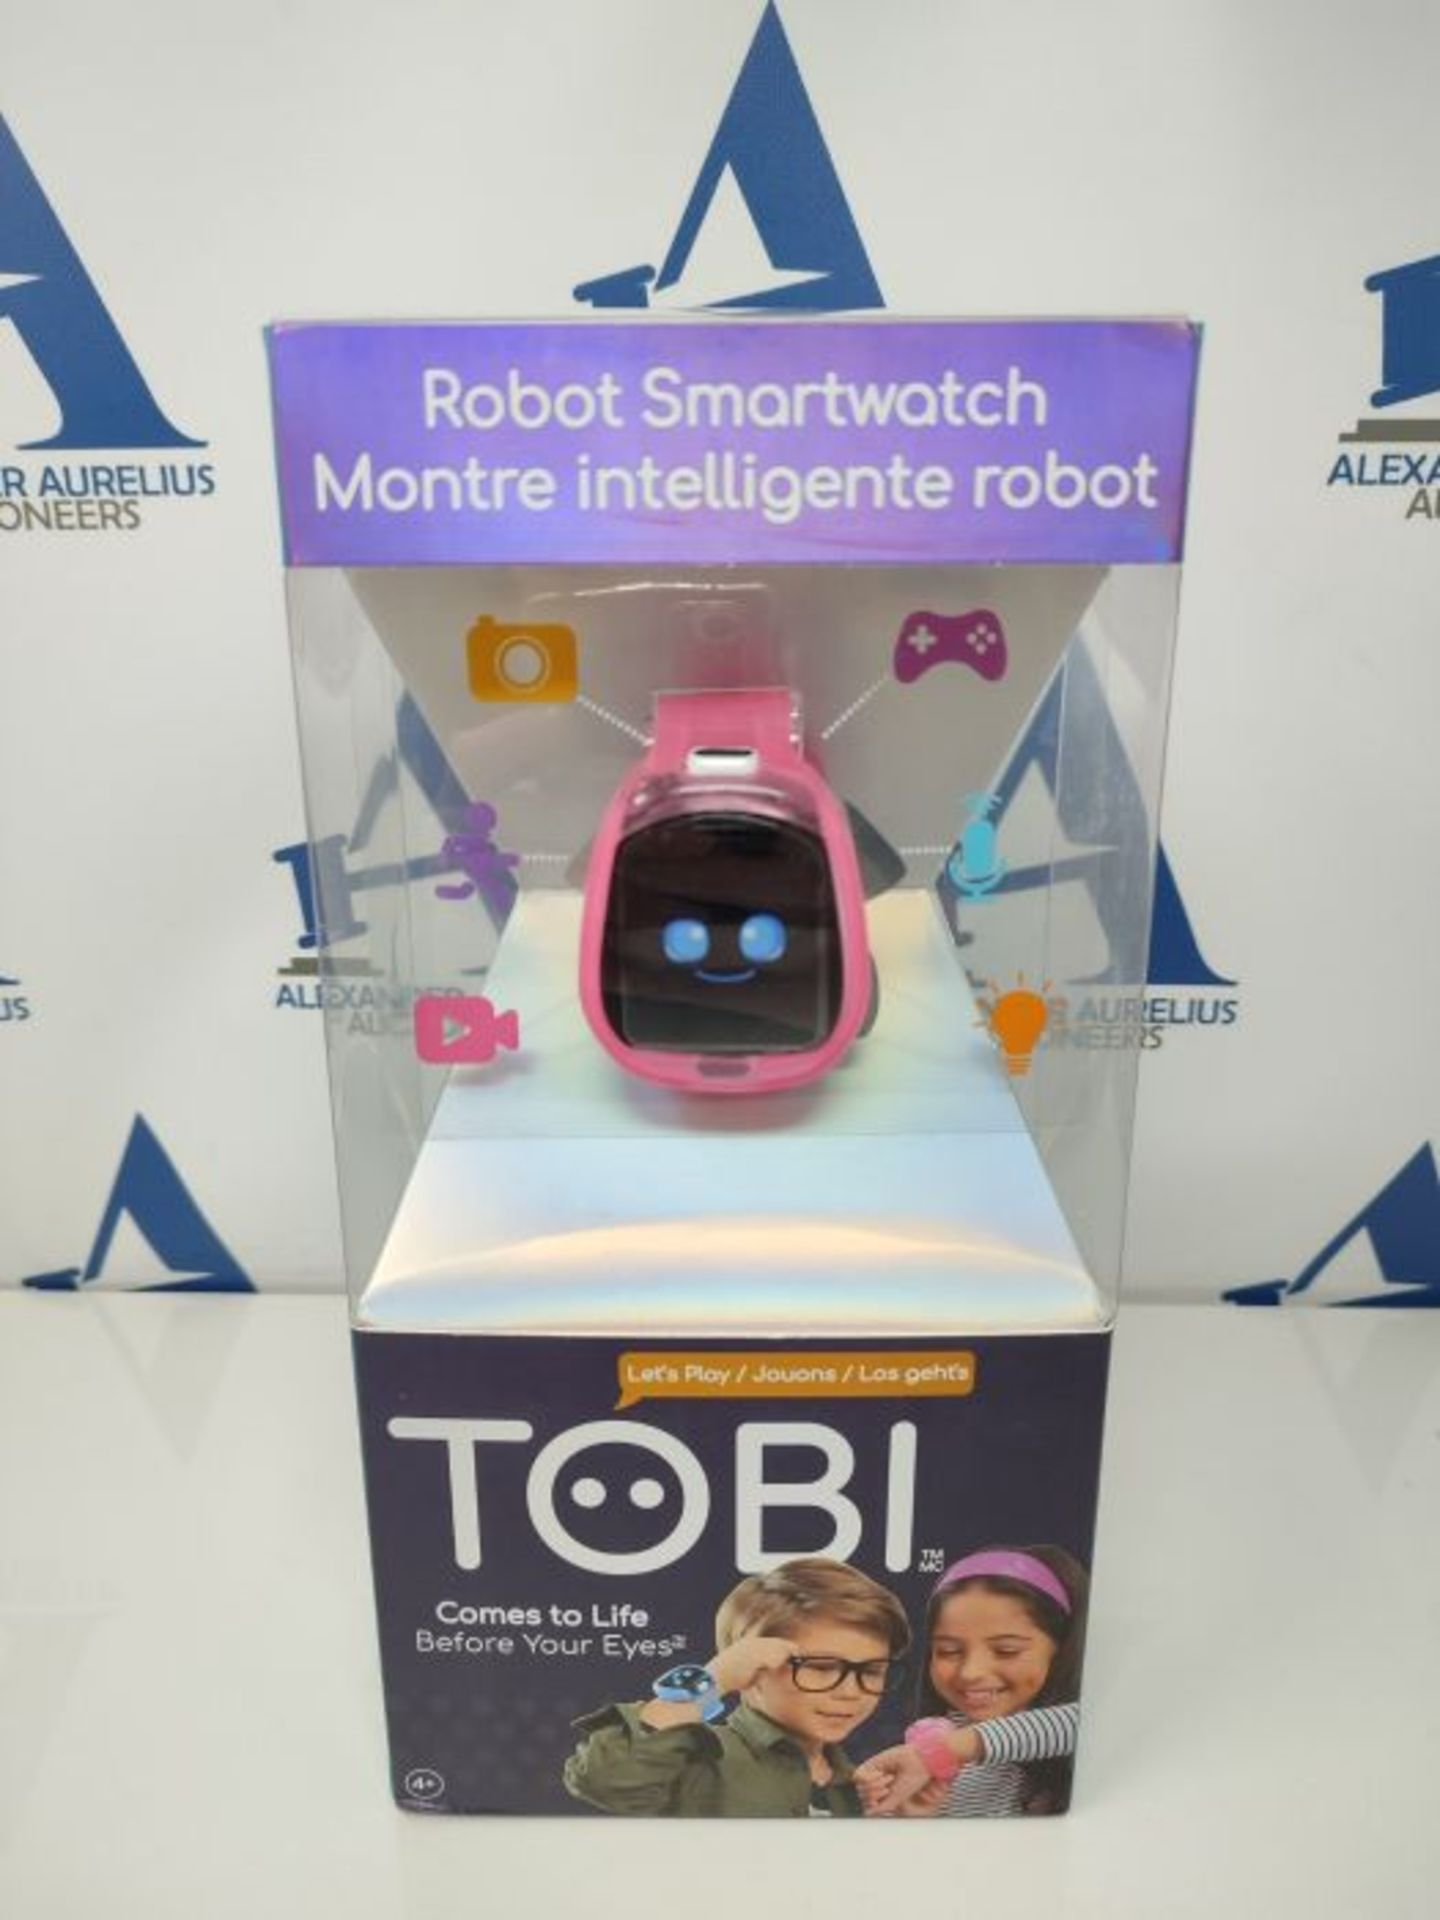 Little Tikes Tobi Robot Smartwatch for Kids with Digital Camera, Video, Games & Activi - Image 2 of 3